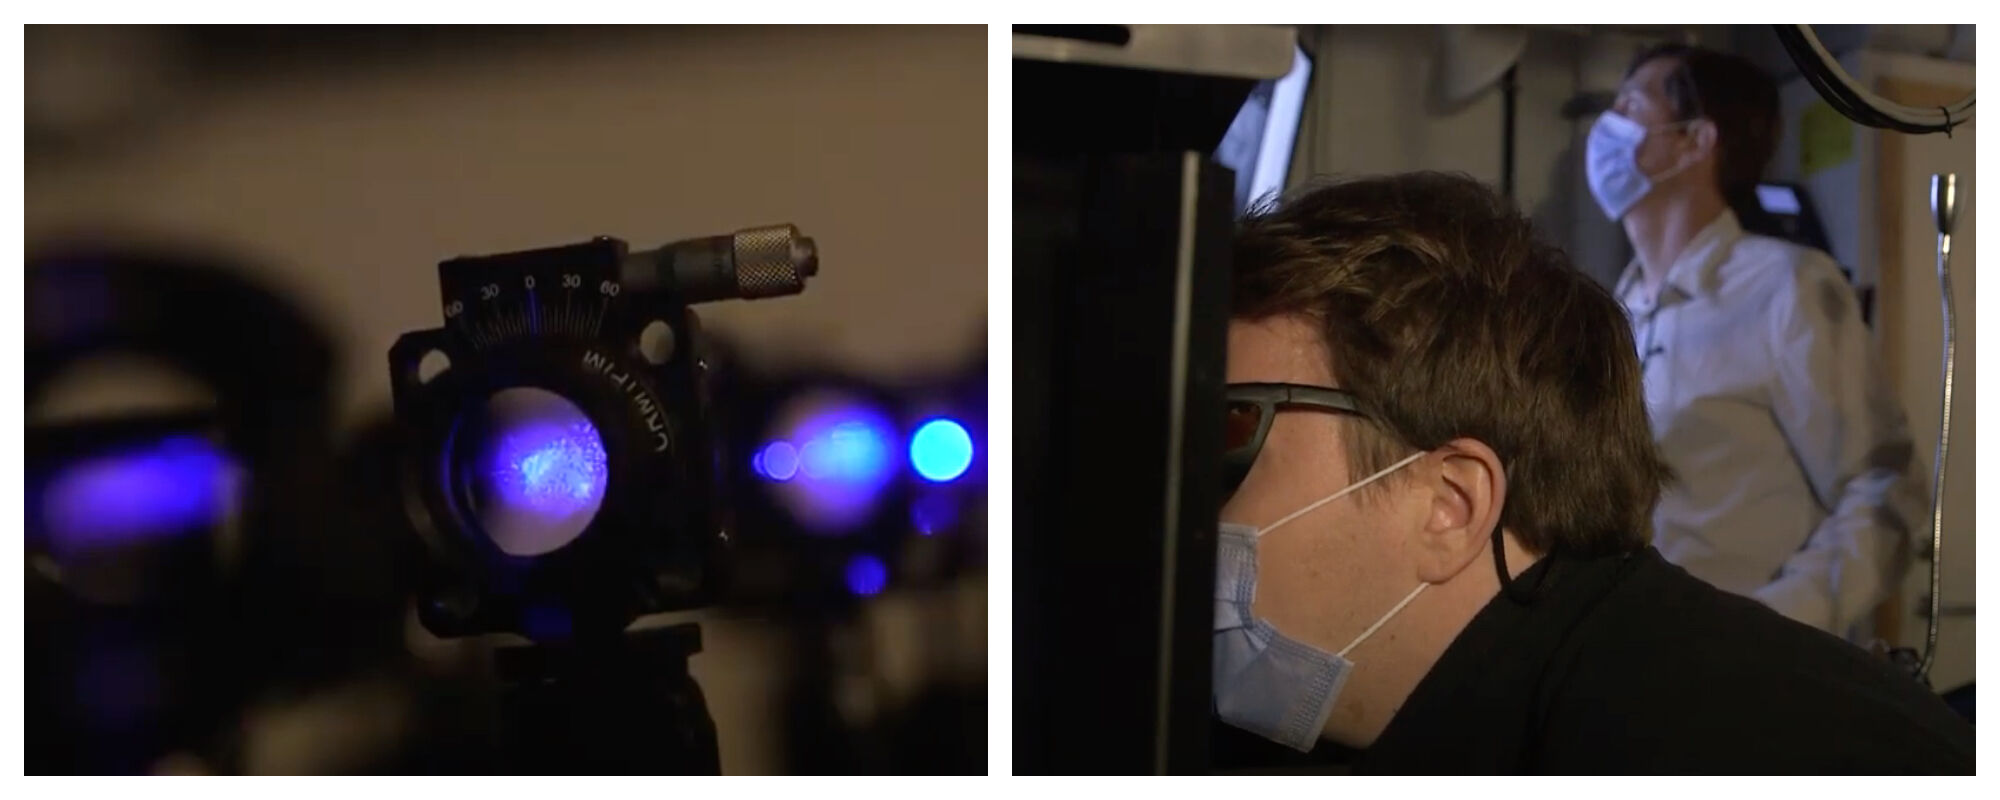 Two images. Close-up of a video camera. One man with face mask sitting in front of a machine, another man in front of a screen. 